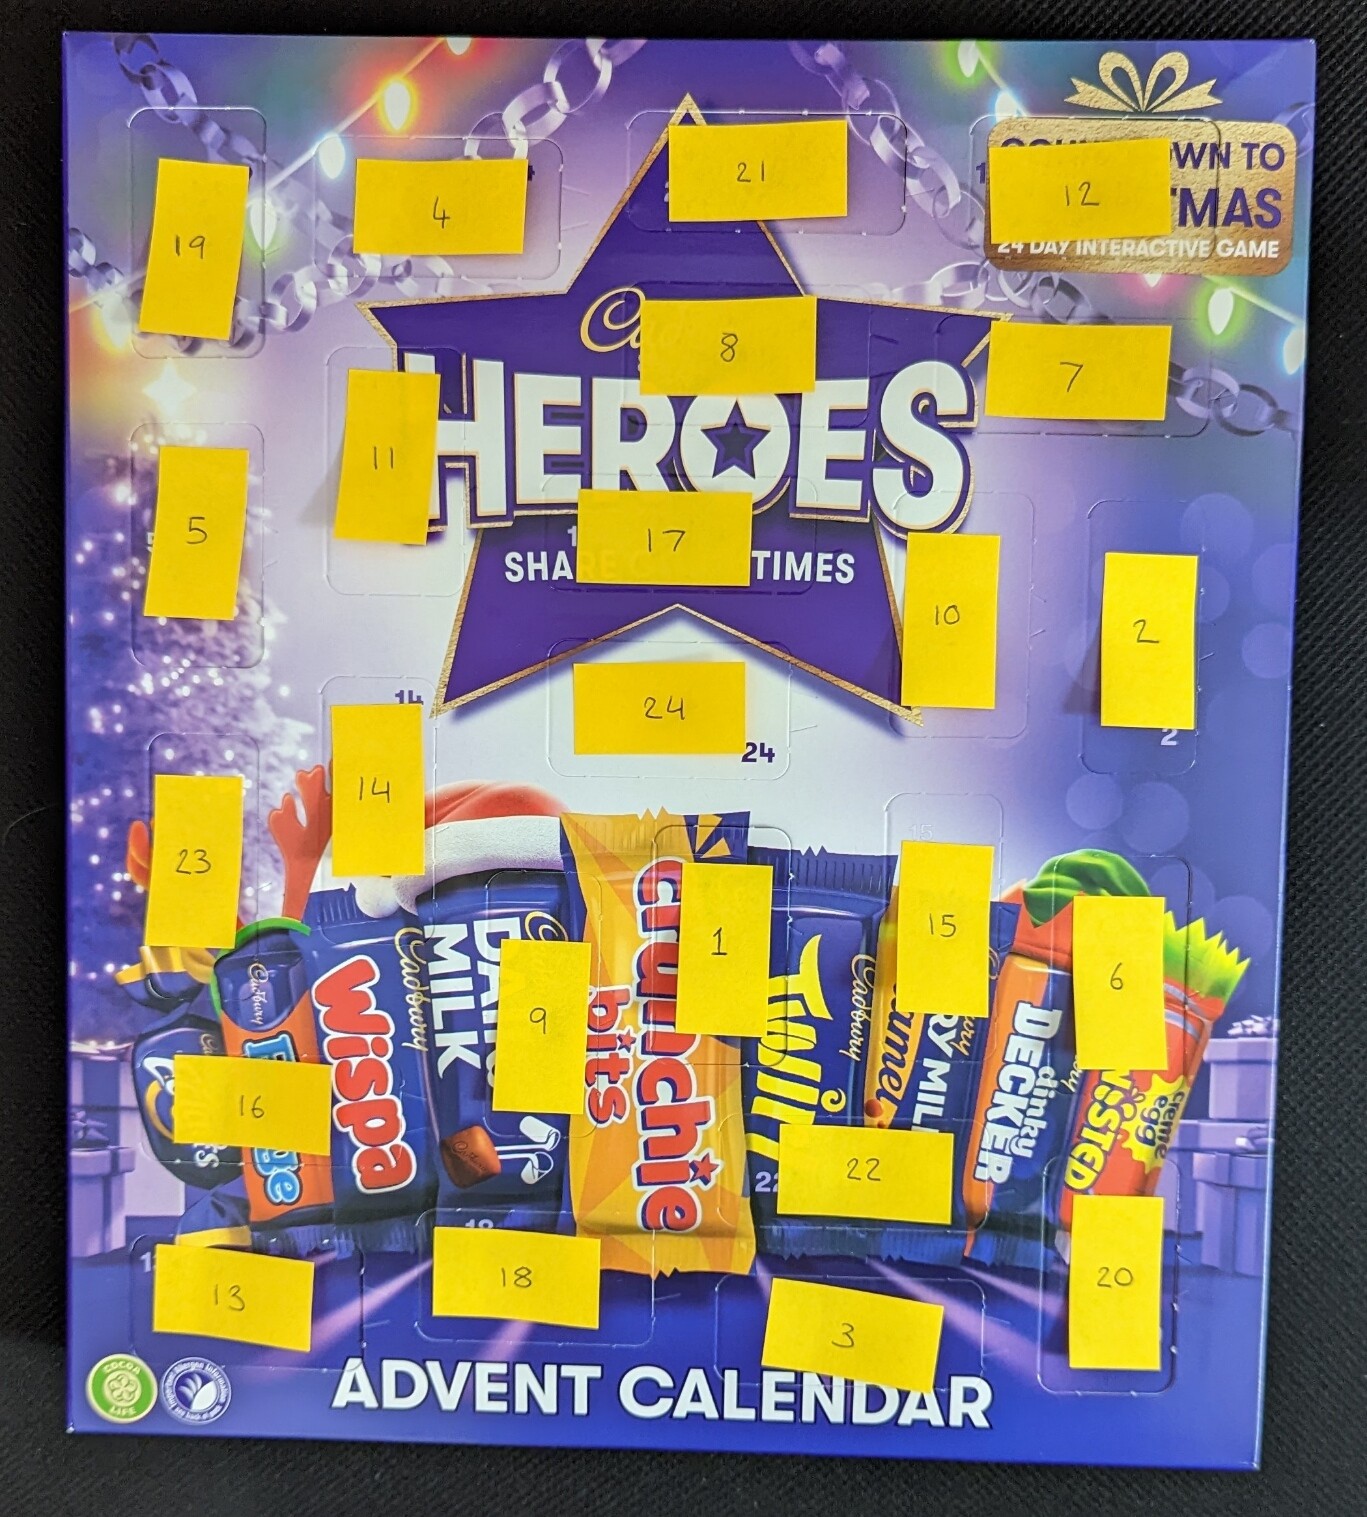 Modified Cabury's Heroes Advent Calendar 2022. This one has yellow sticky notes that are numbered 1-24 and are placed over the corresponding doors of the advent calendar.